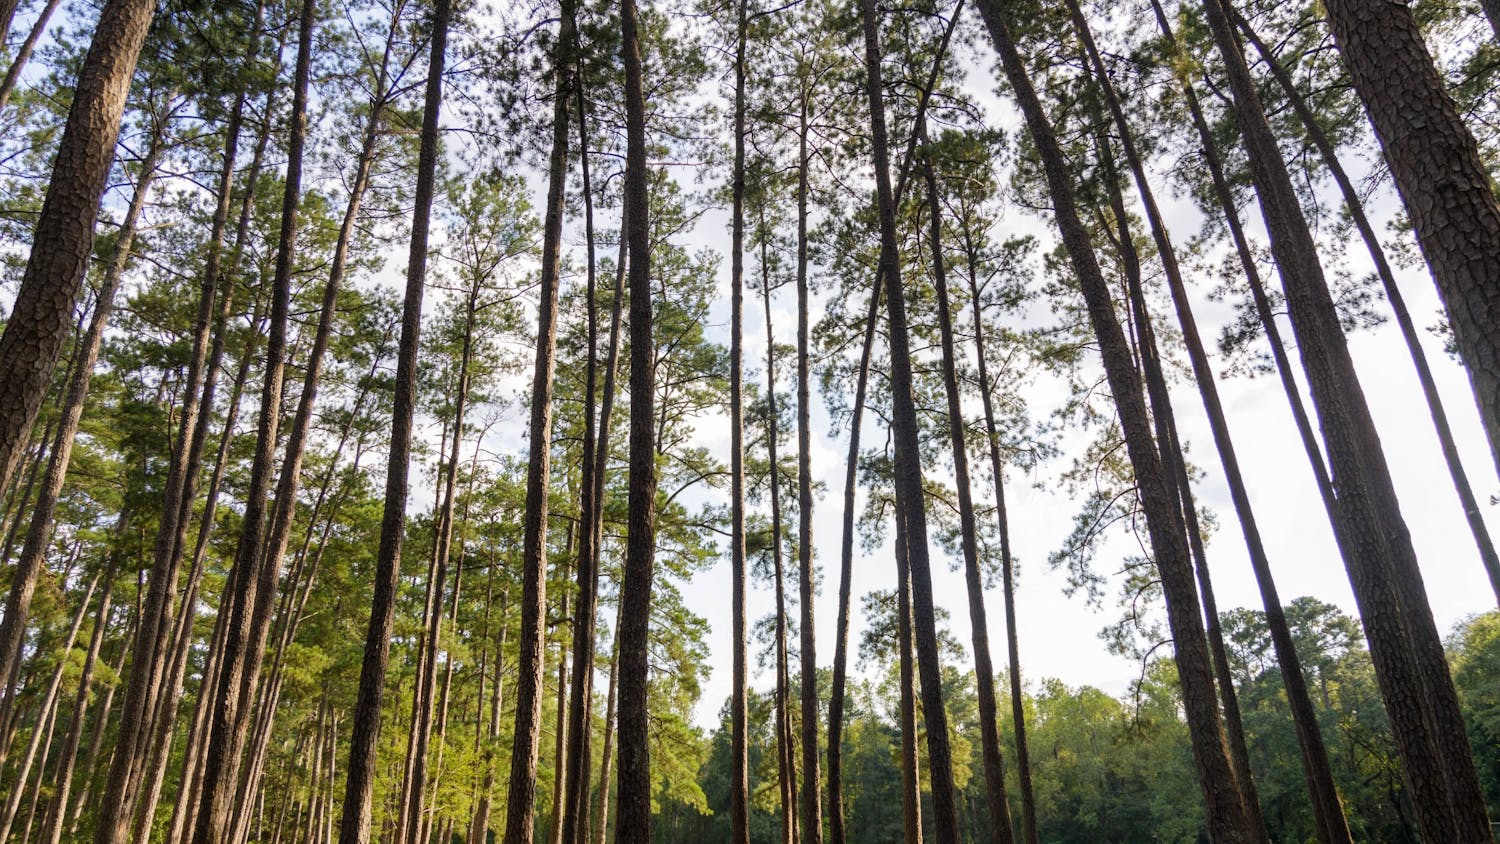 A grove of trees at "Sesqui," or Sesquicentennial State Park. Sesquicentennial State Park was created by the Civilian Conservation Corps and has hiking trails, streams, a pond, camping sites, a dog park and plenty of forest and fields.&nbsp;